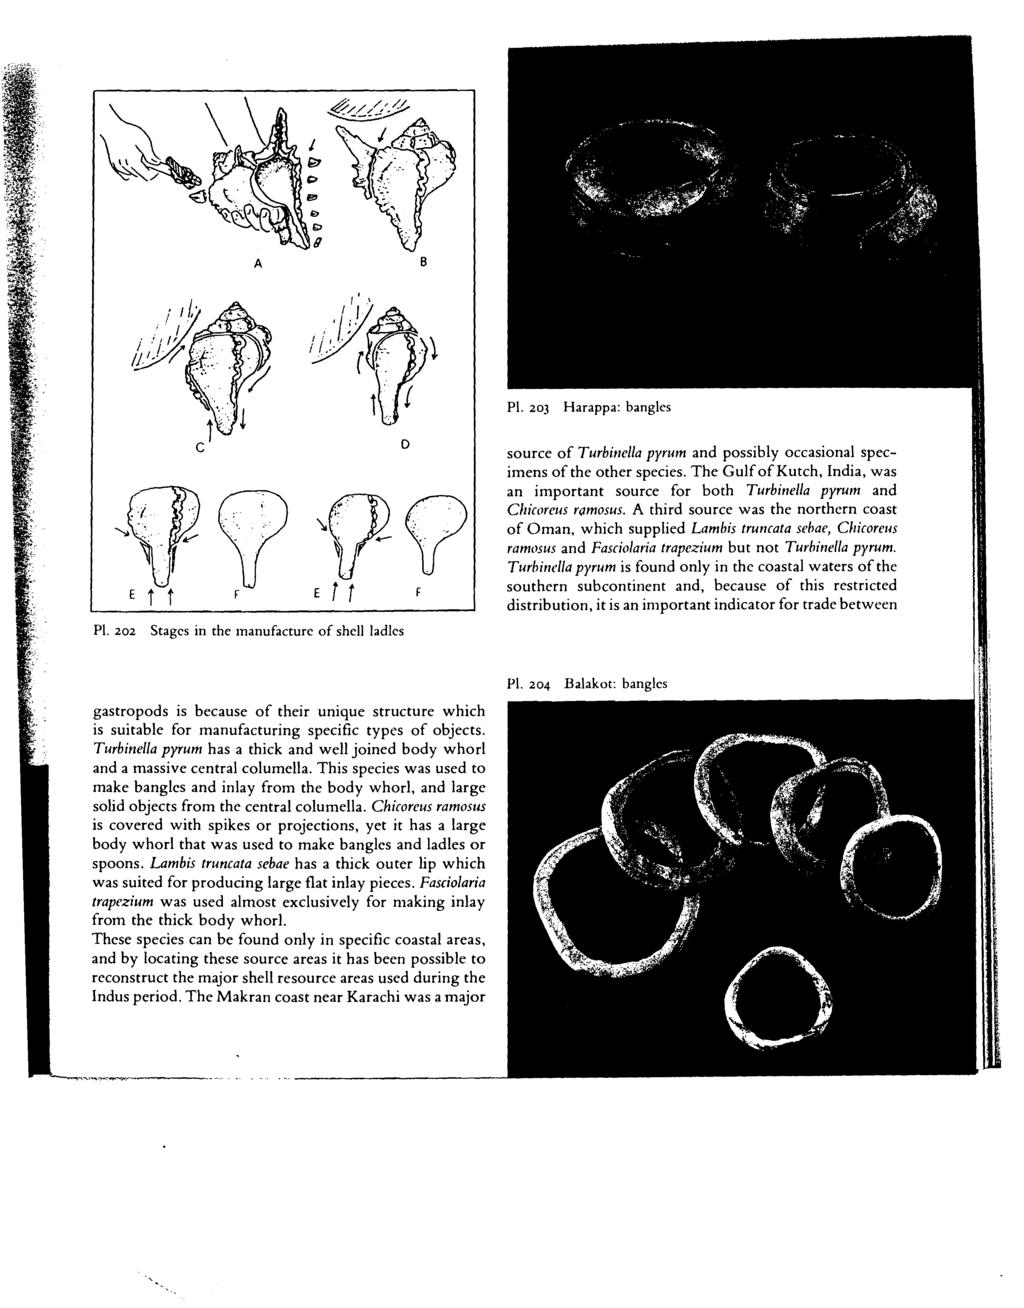 A B P. 203 Harappa: bangles P. 202 Stages in the manufacture of shell ladles o source of Turbinella pyrum and possibly occasional specimens of the other species.